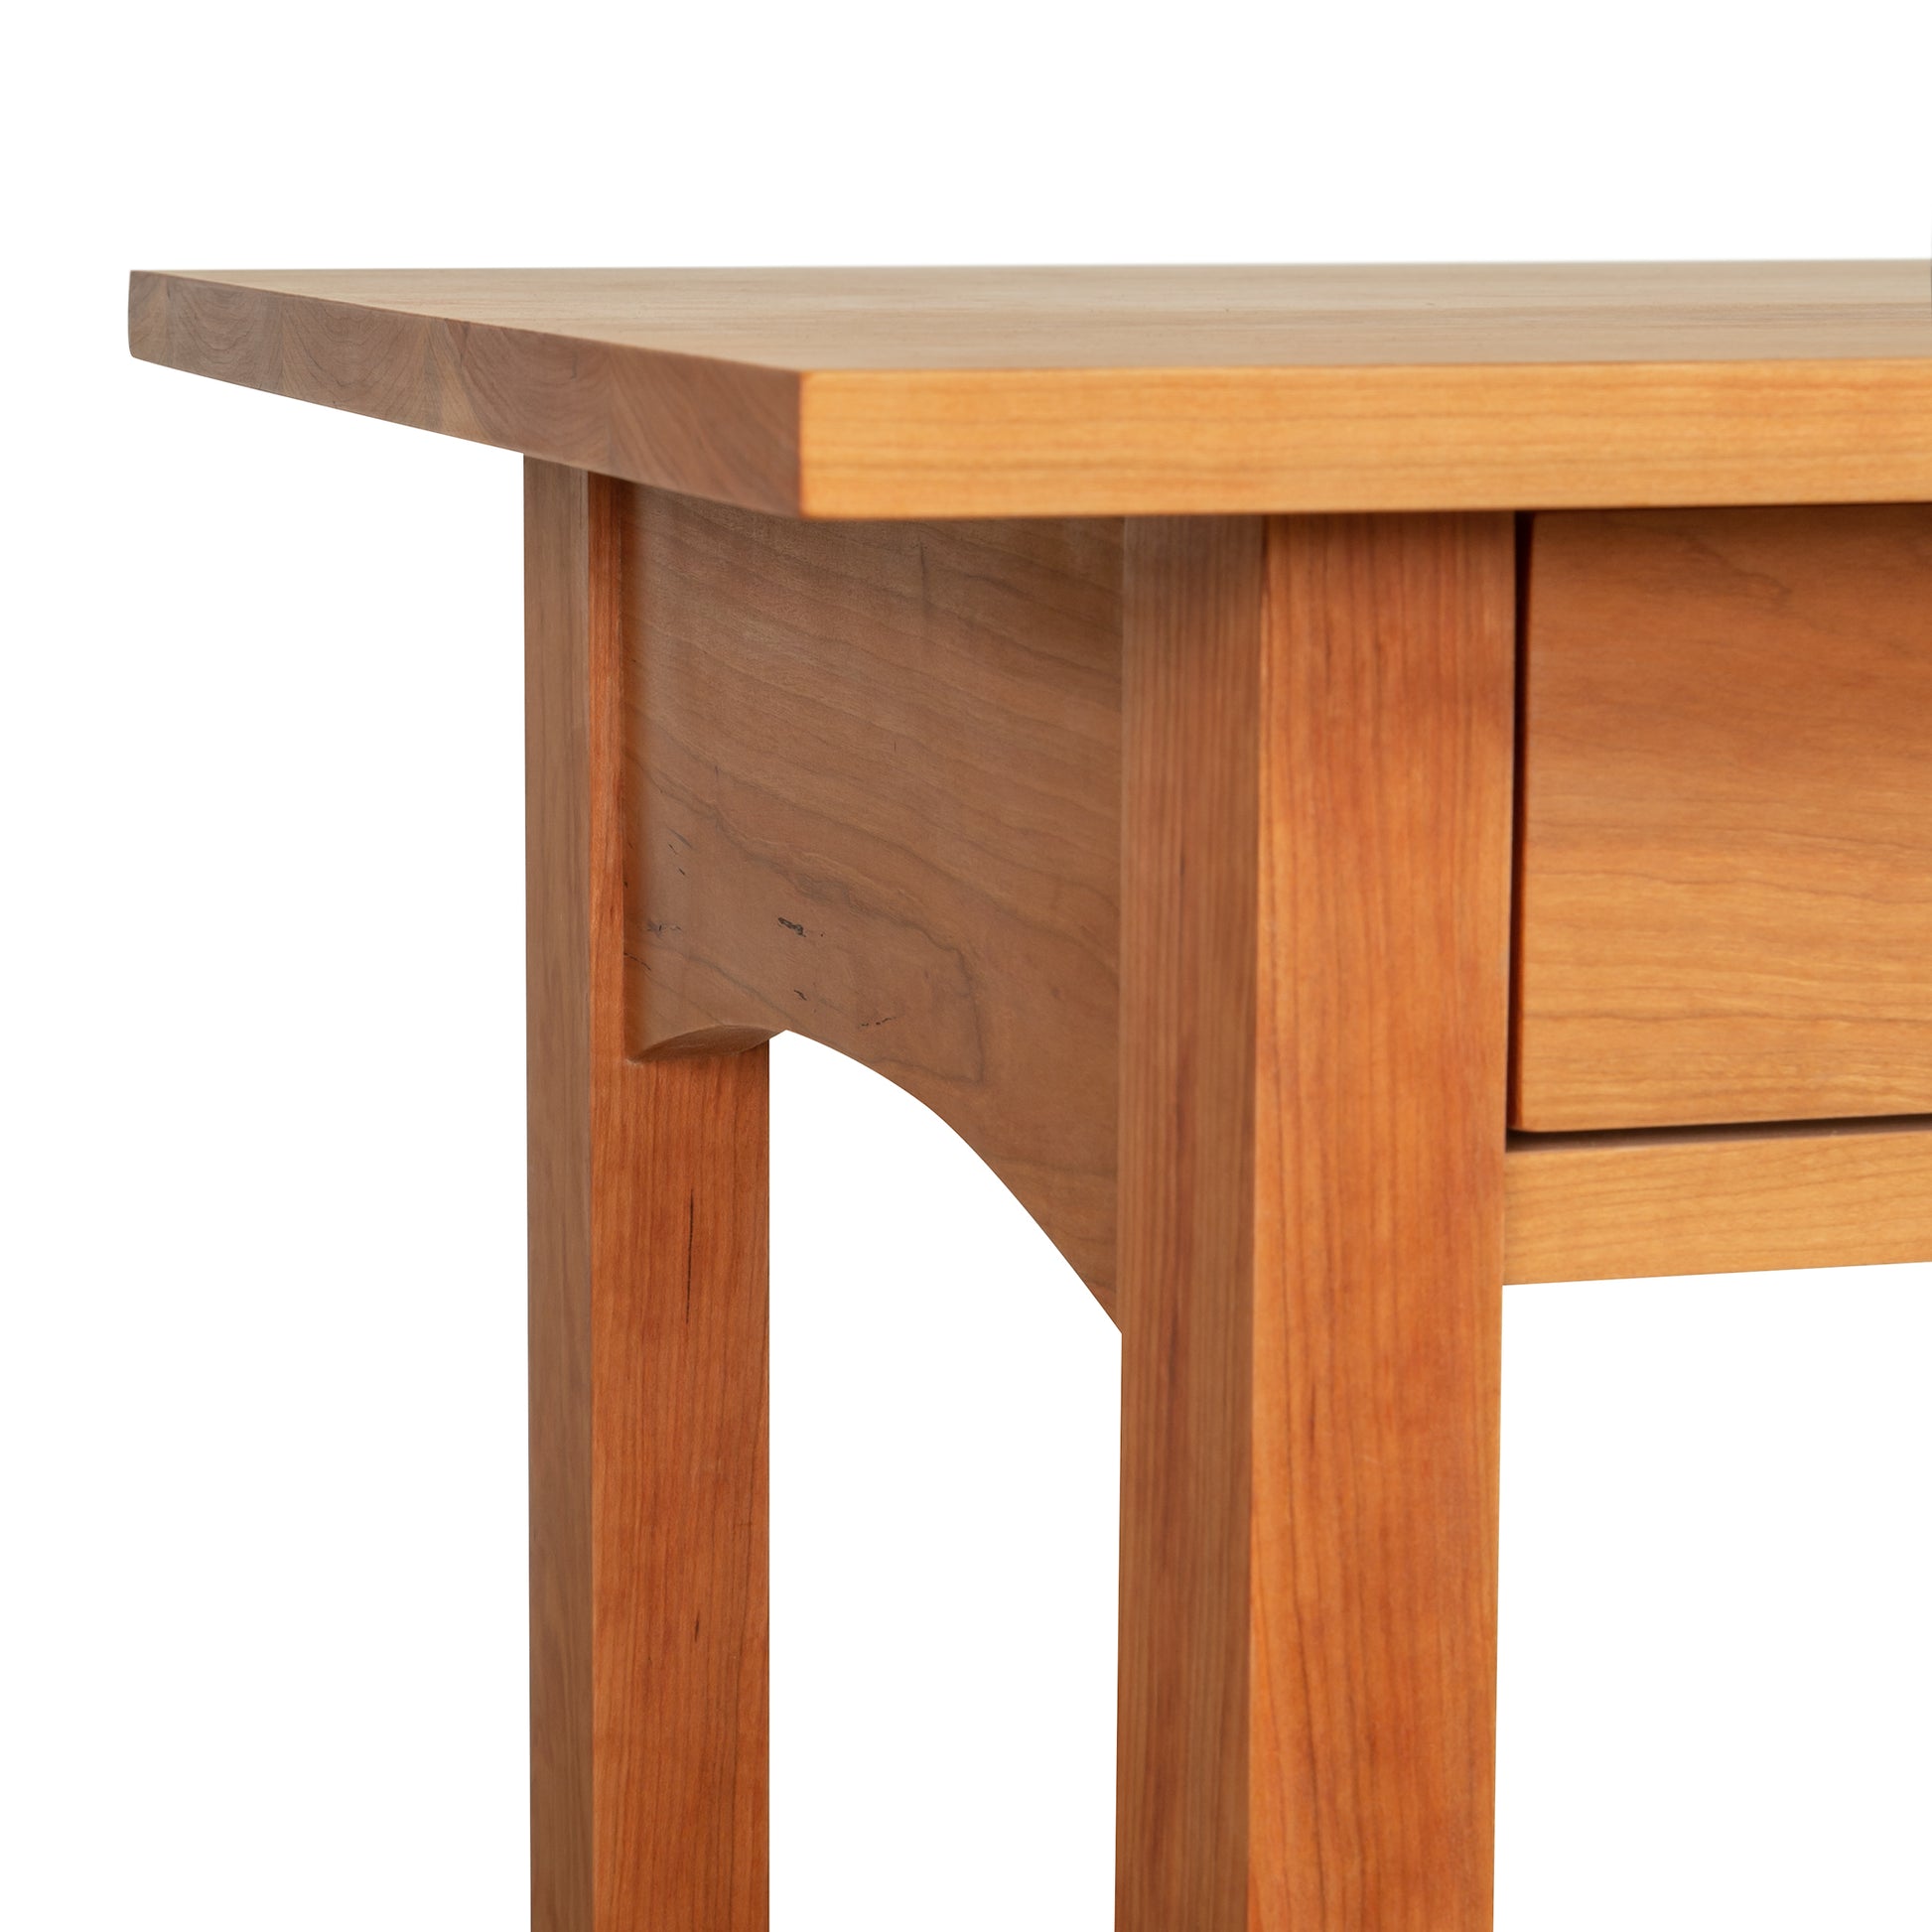 Corner of a Burlington Shaker 2-Drawer Coffee Table by Vermont Furniture Designs, showcasing its design and wood grain against a white background.